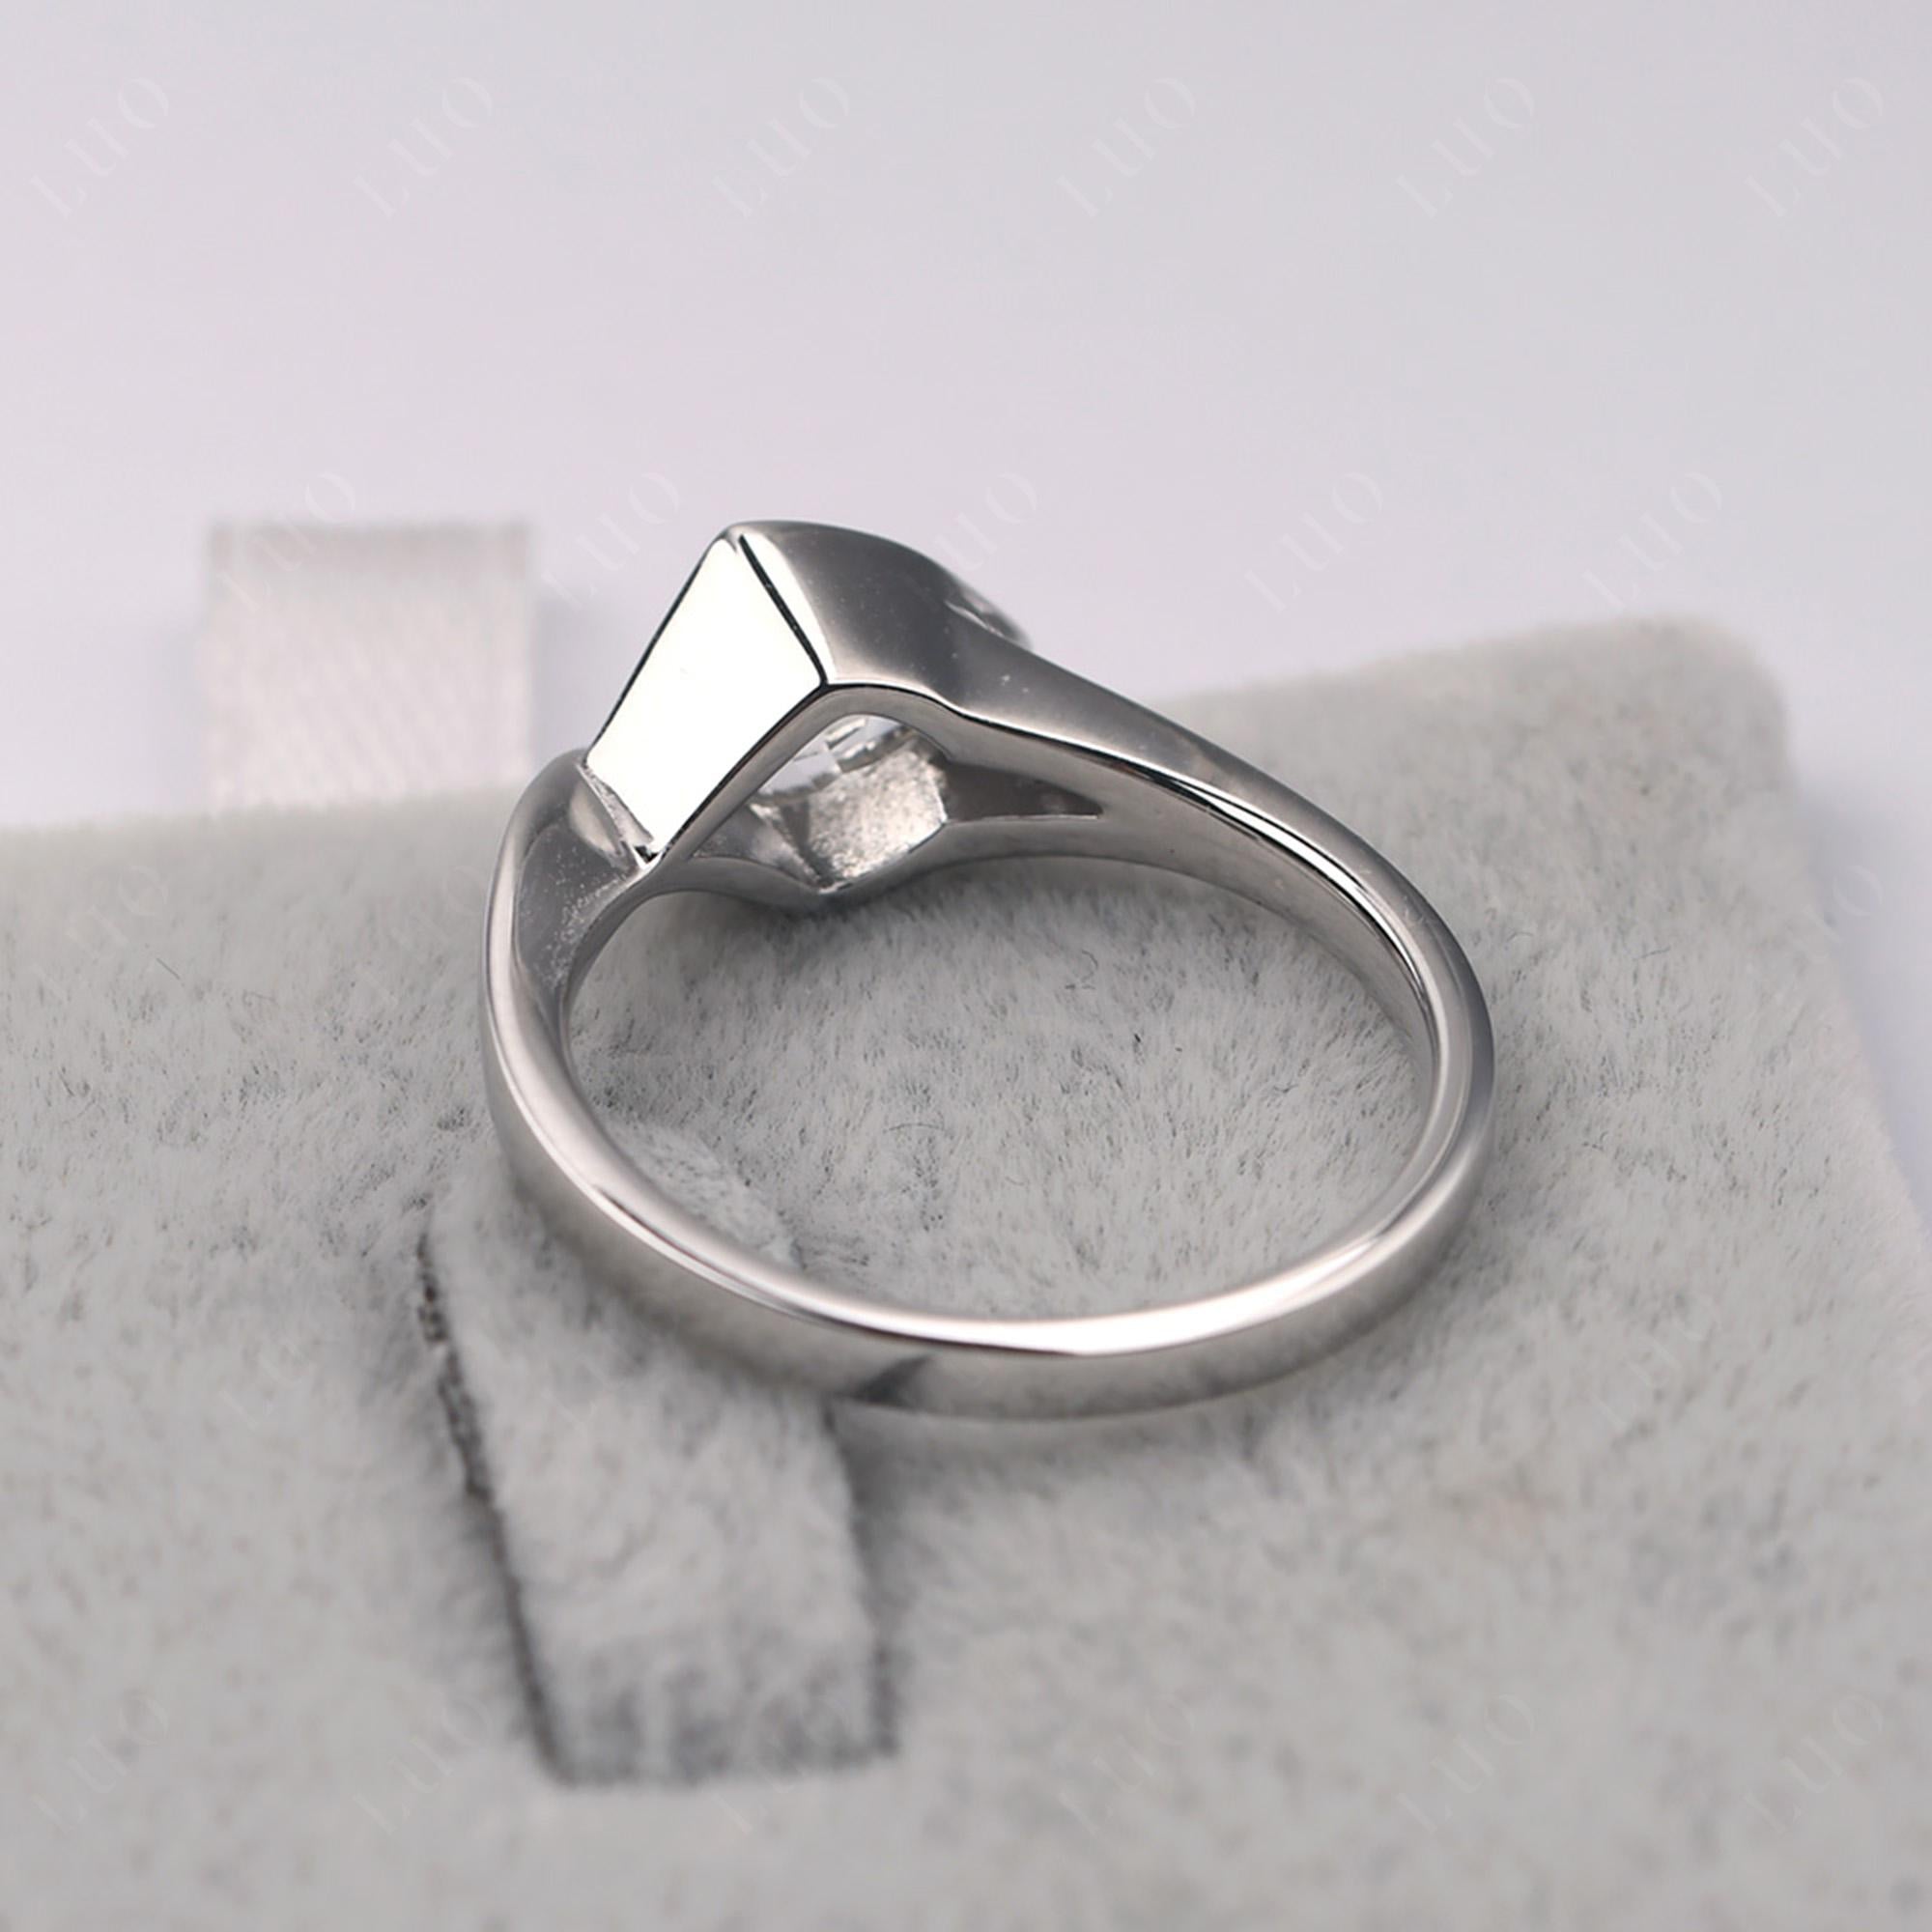 Trillion Cut Simple White Topaz Ring - LUO Jewelry